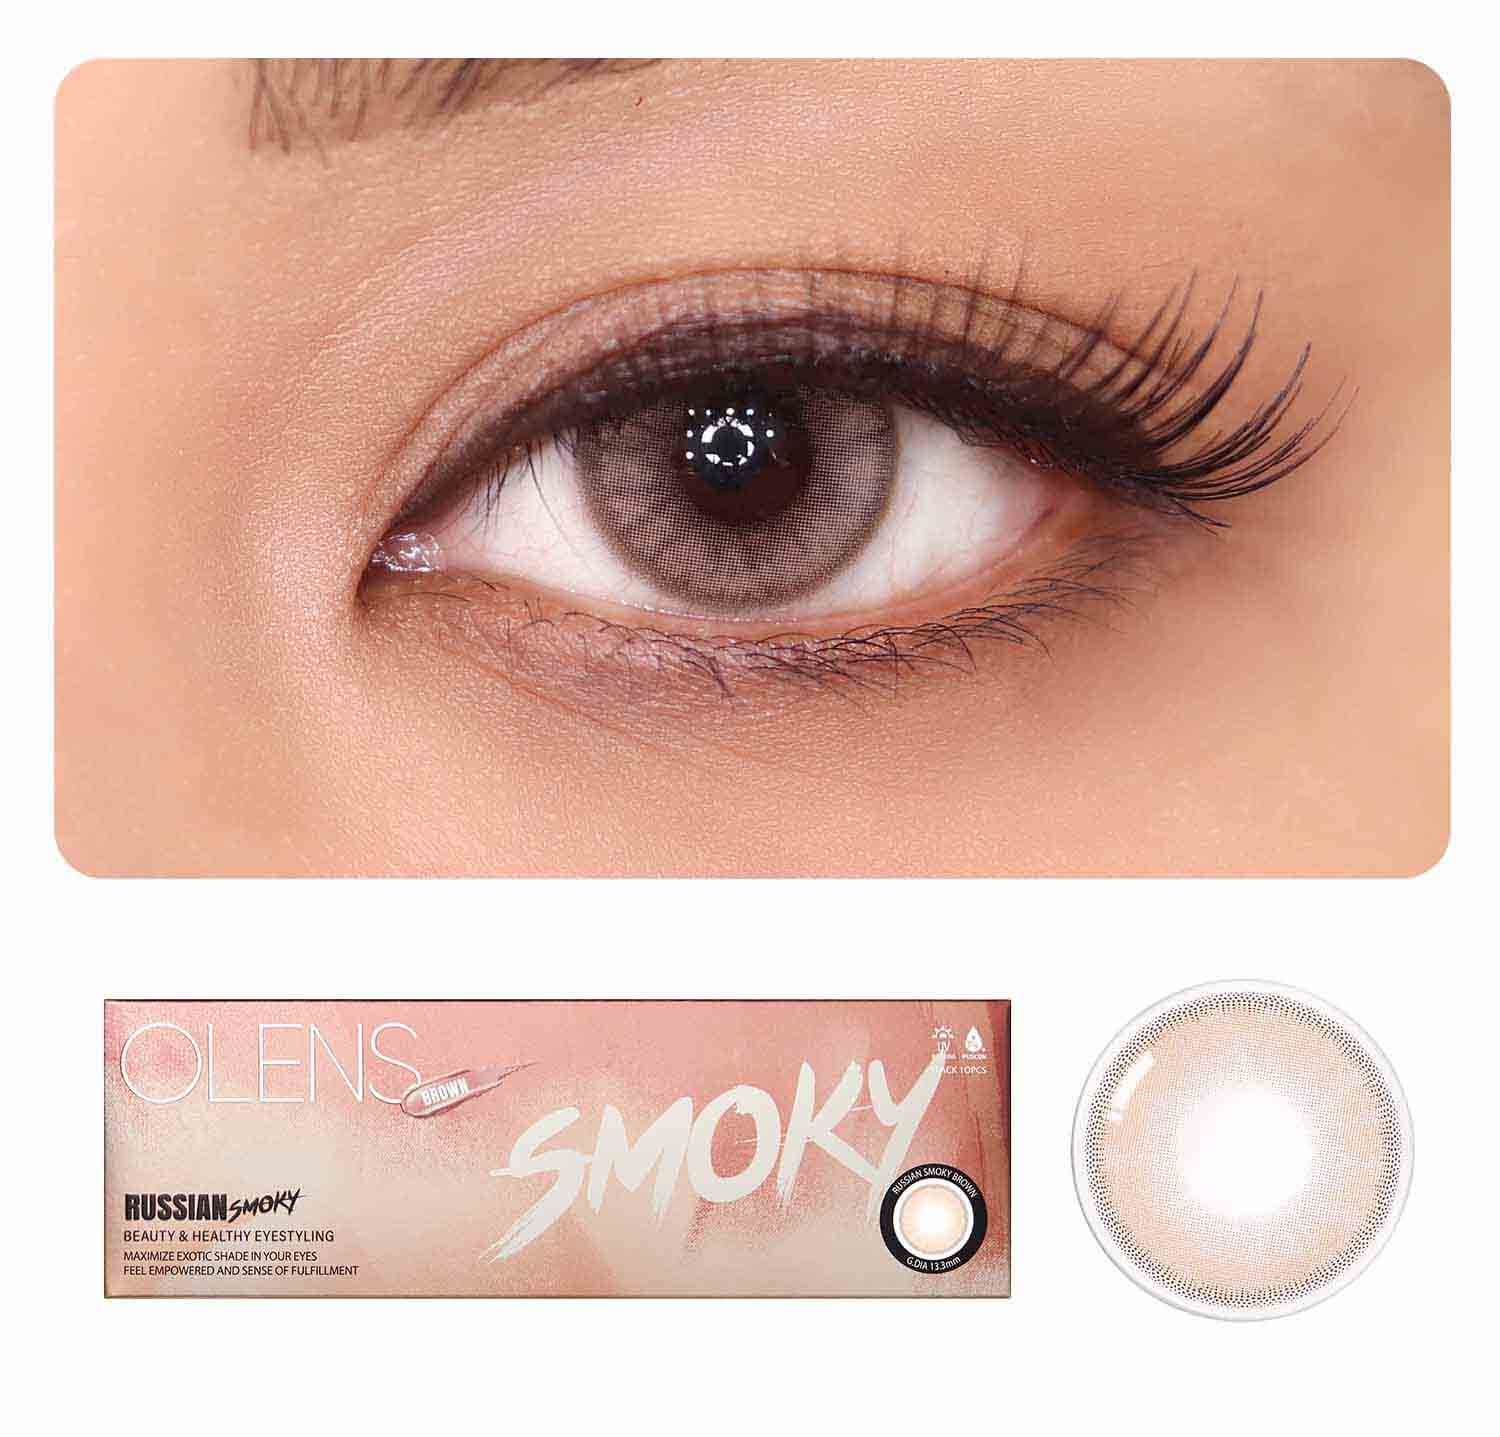 OLENS Premium Color Contact Lens Russian smoky brown color lens at best prices online in India | o-lens.co.in.